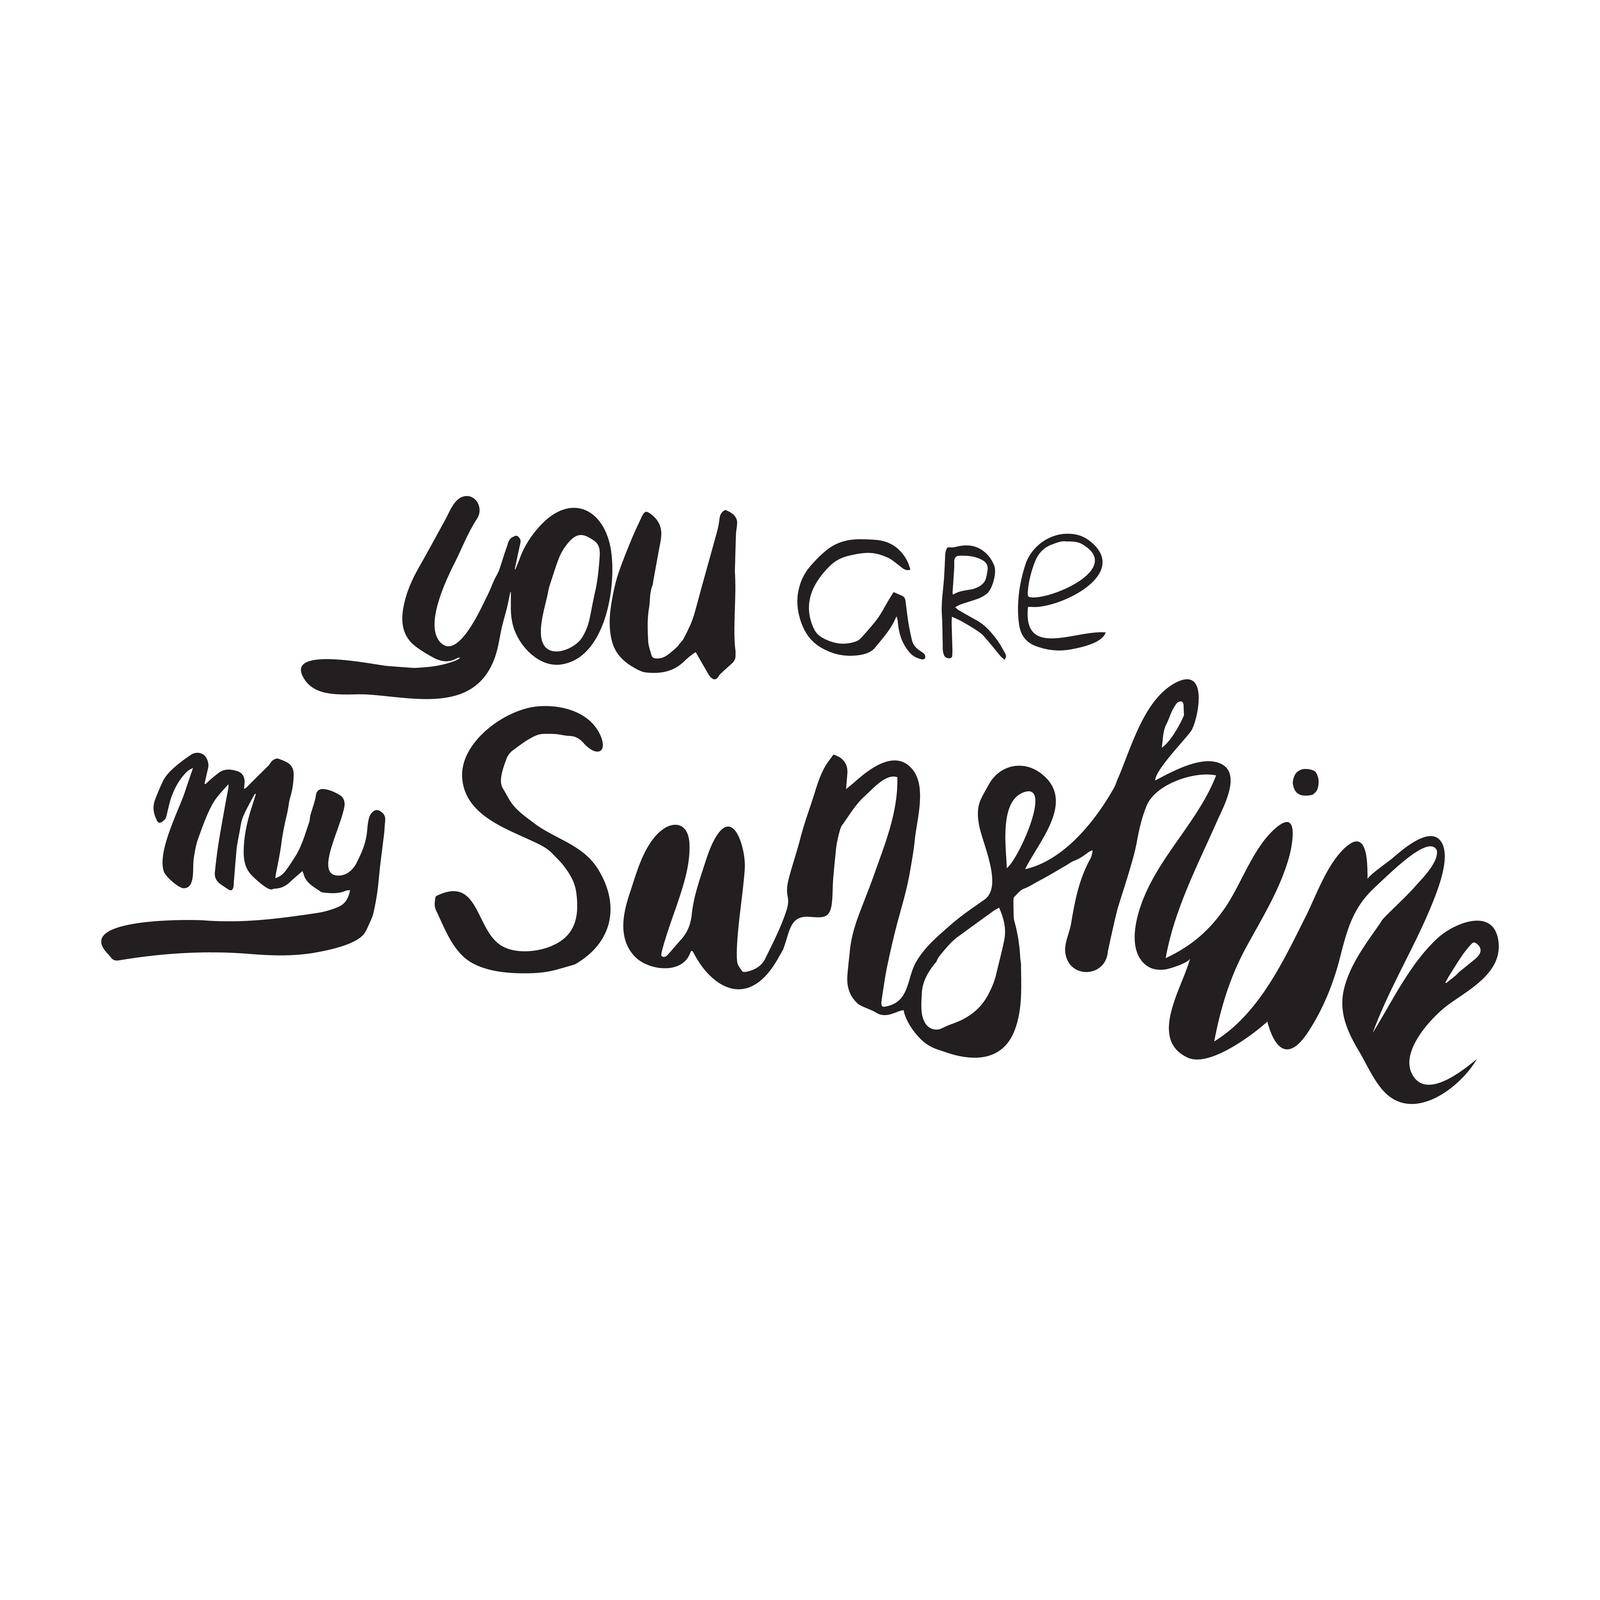 Motivational quote in vector for poster and cards. You are my sunshine